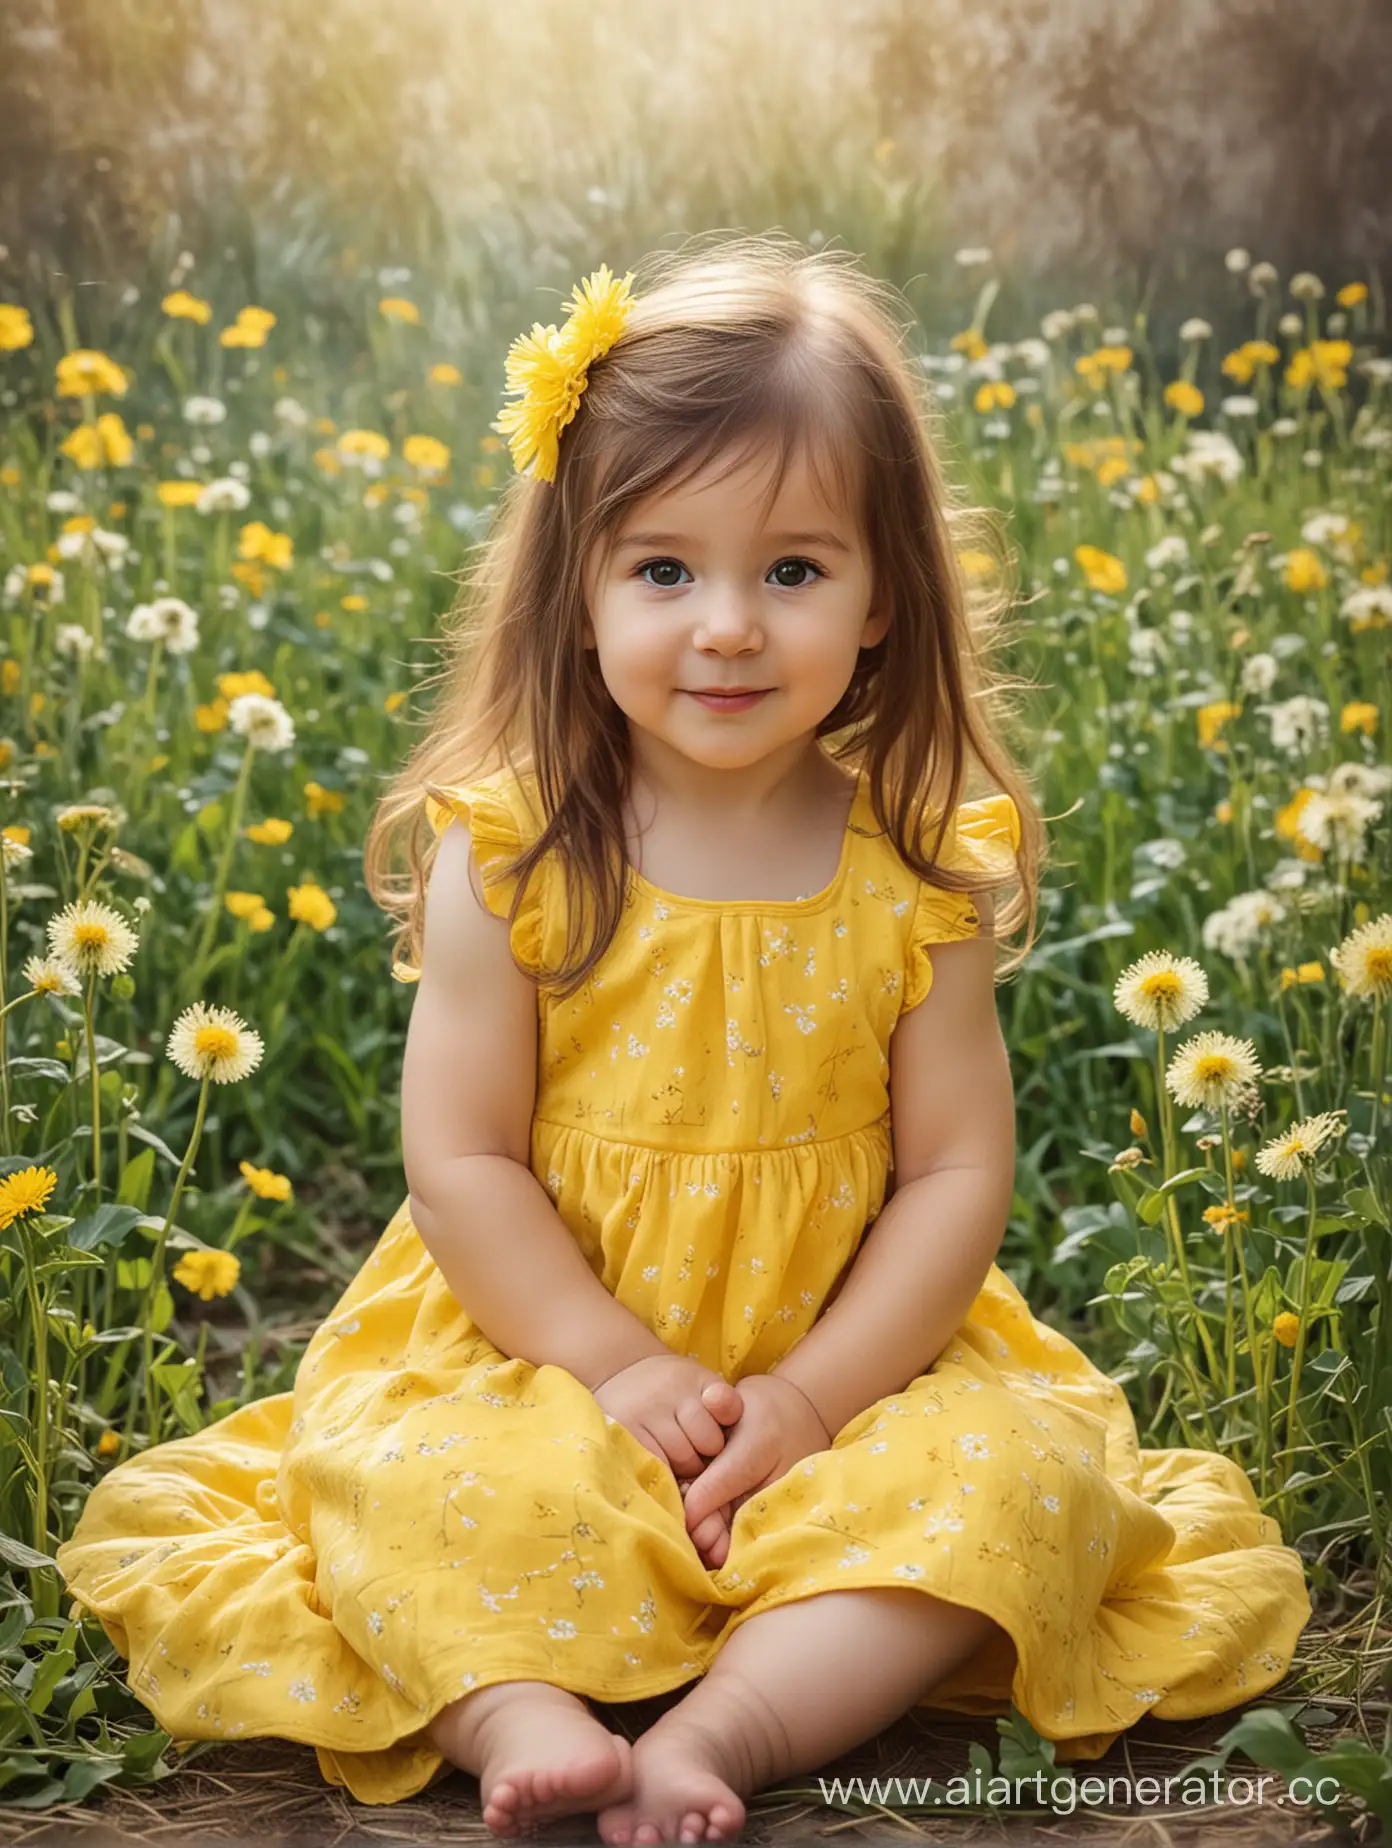 girl 1 year old brown long hair, yellow fluffy dress , sitting in dandelions nature highlights, background brushstrokes texture canvas